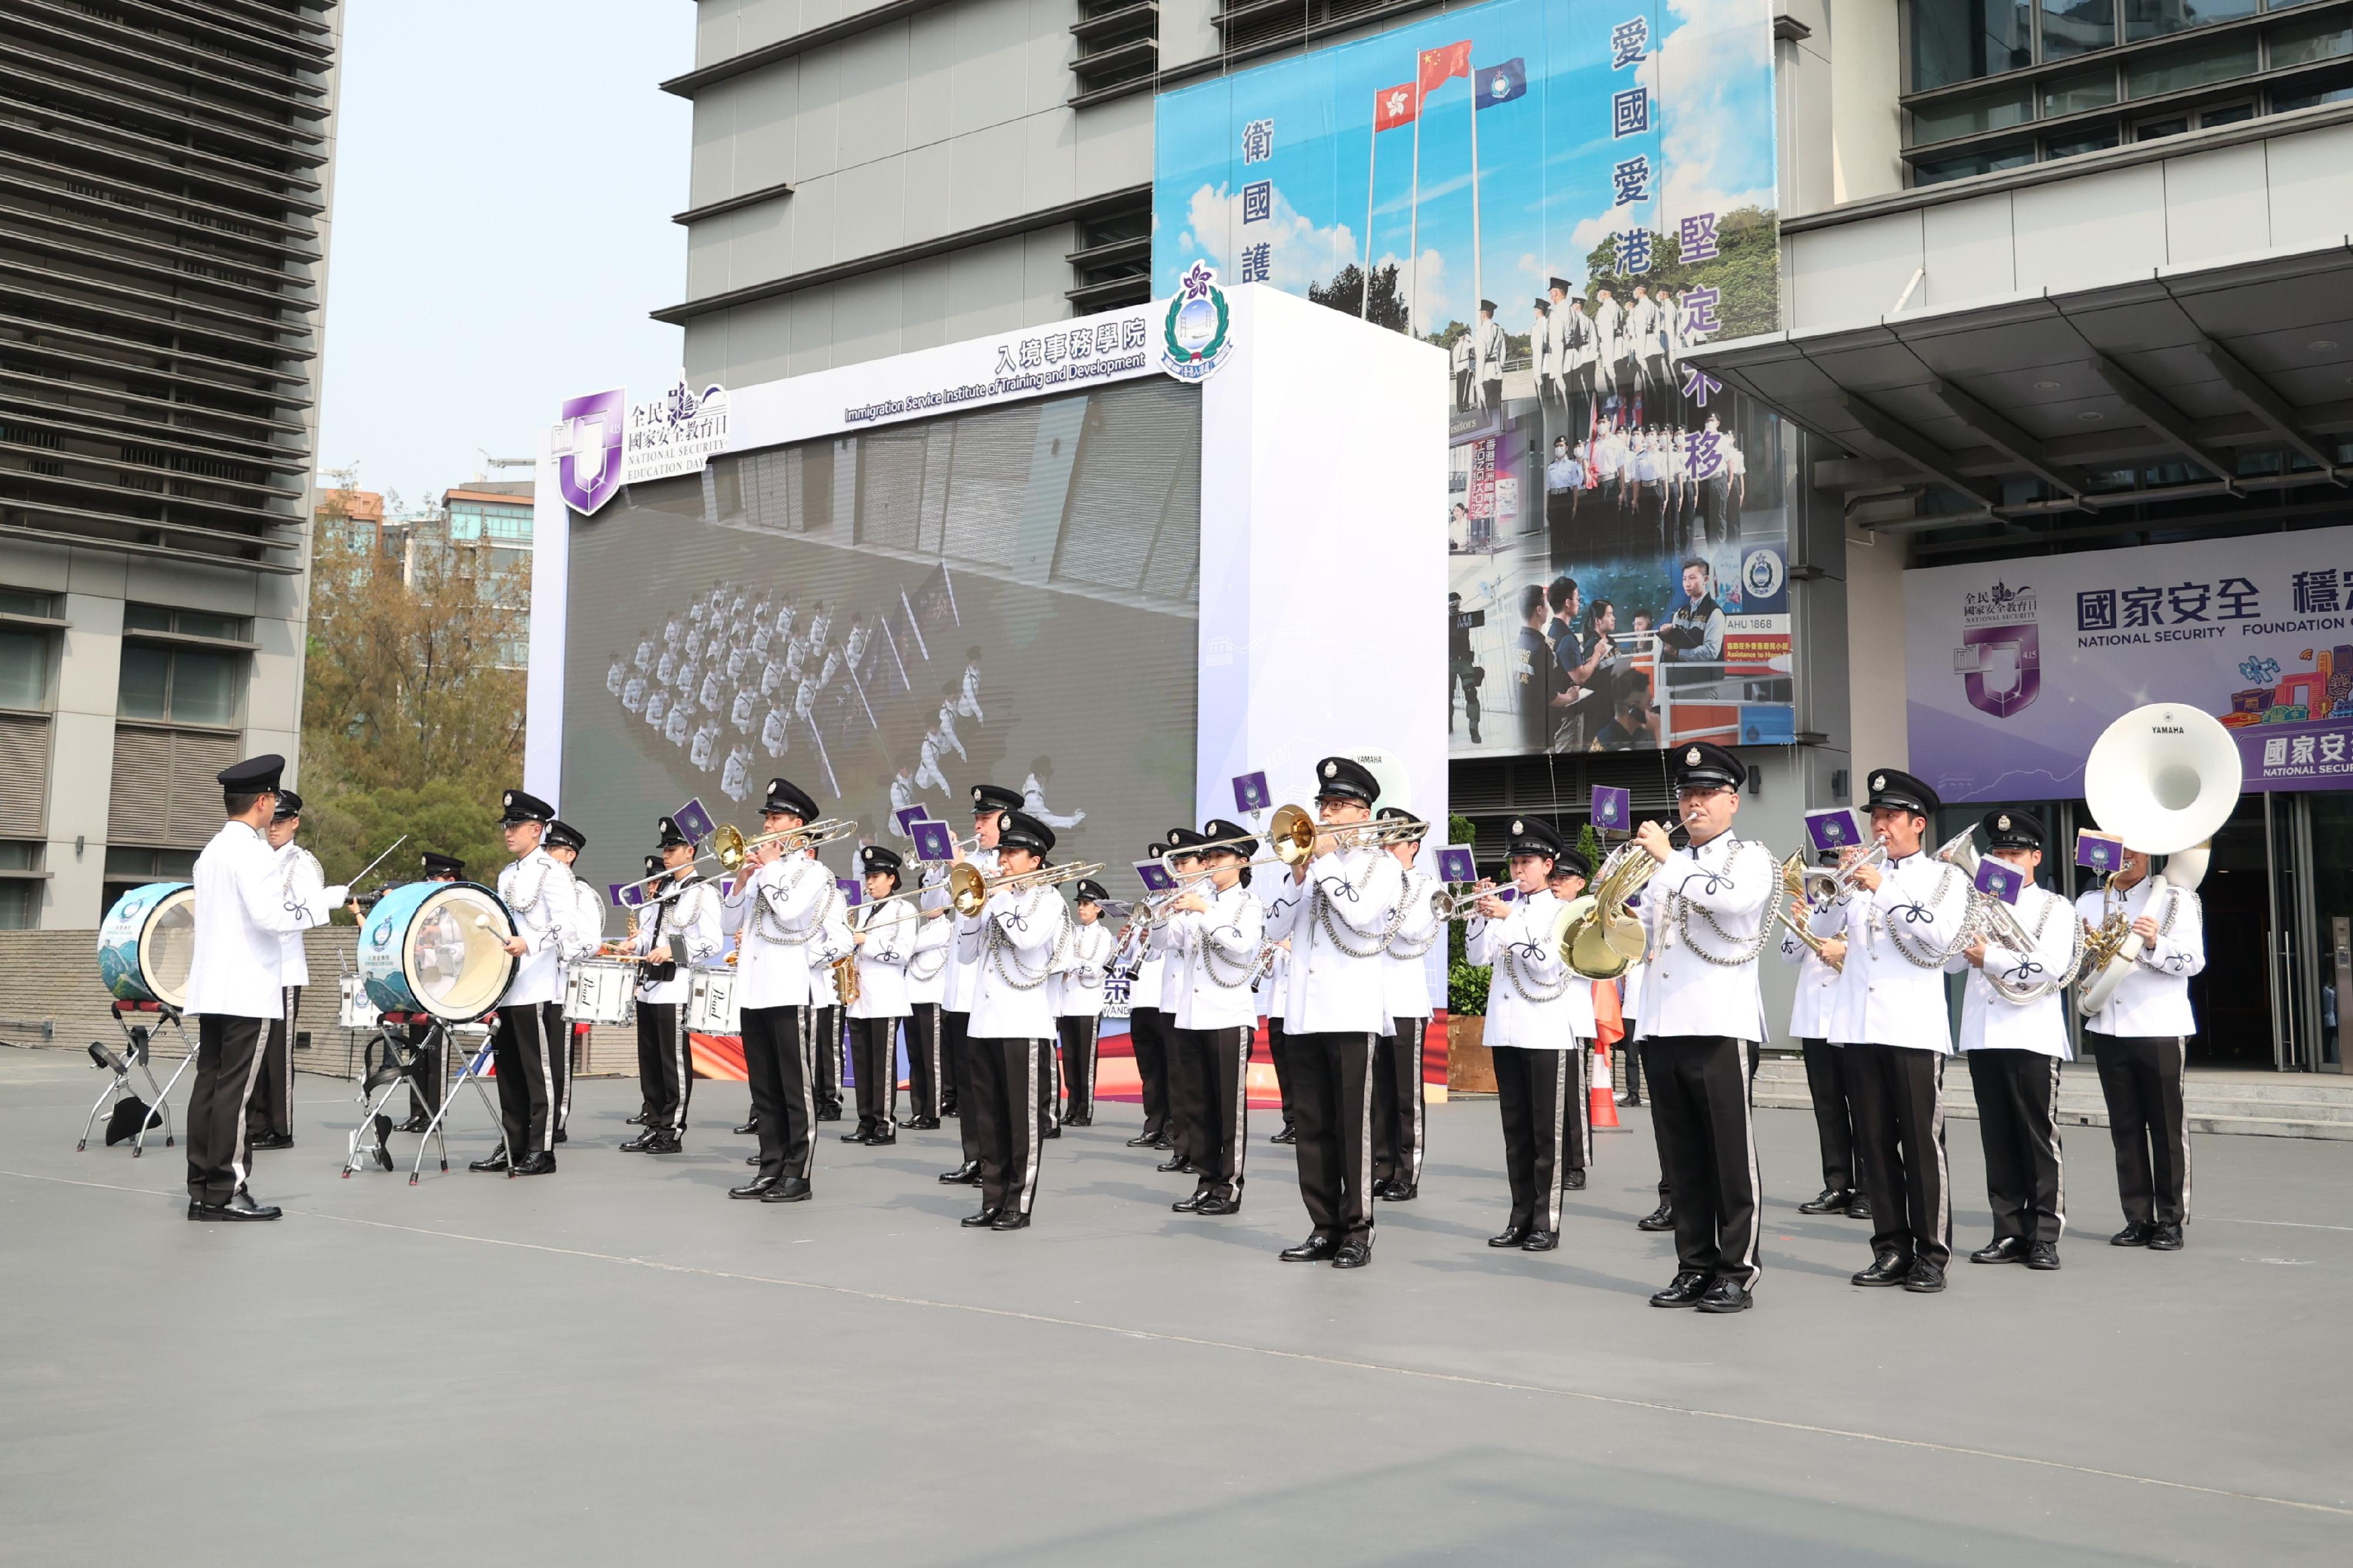 The Immigration Band gave a performance during an open day for the National Security Education Day today (April 15).